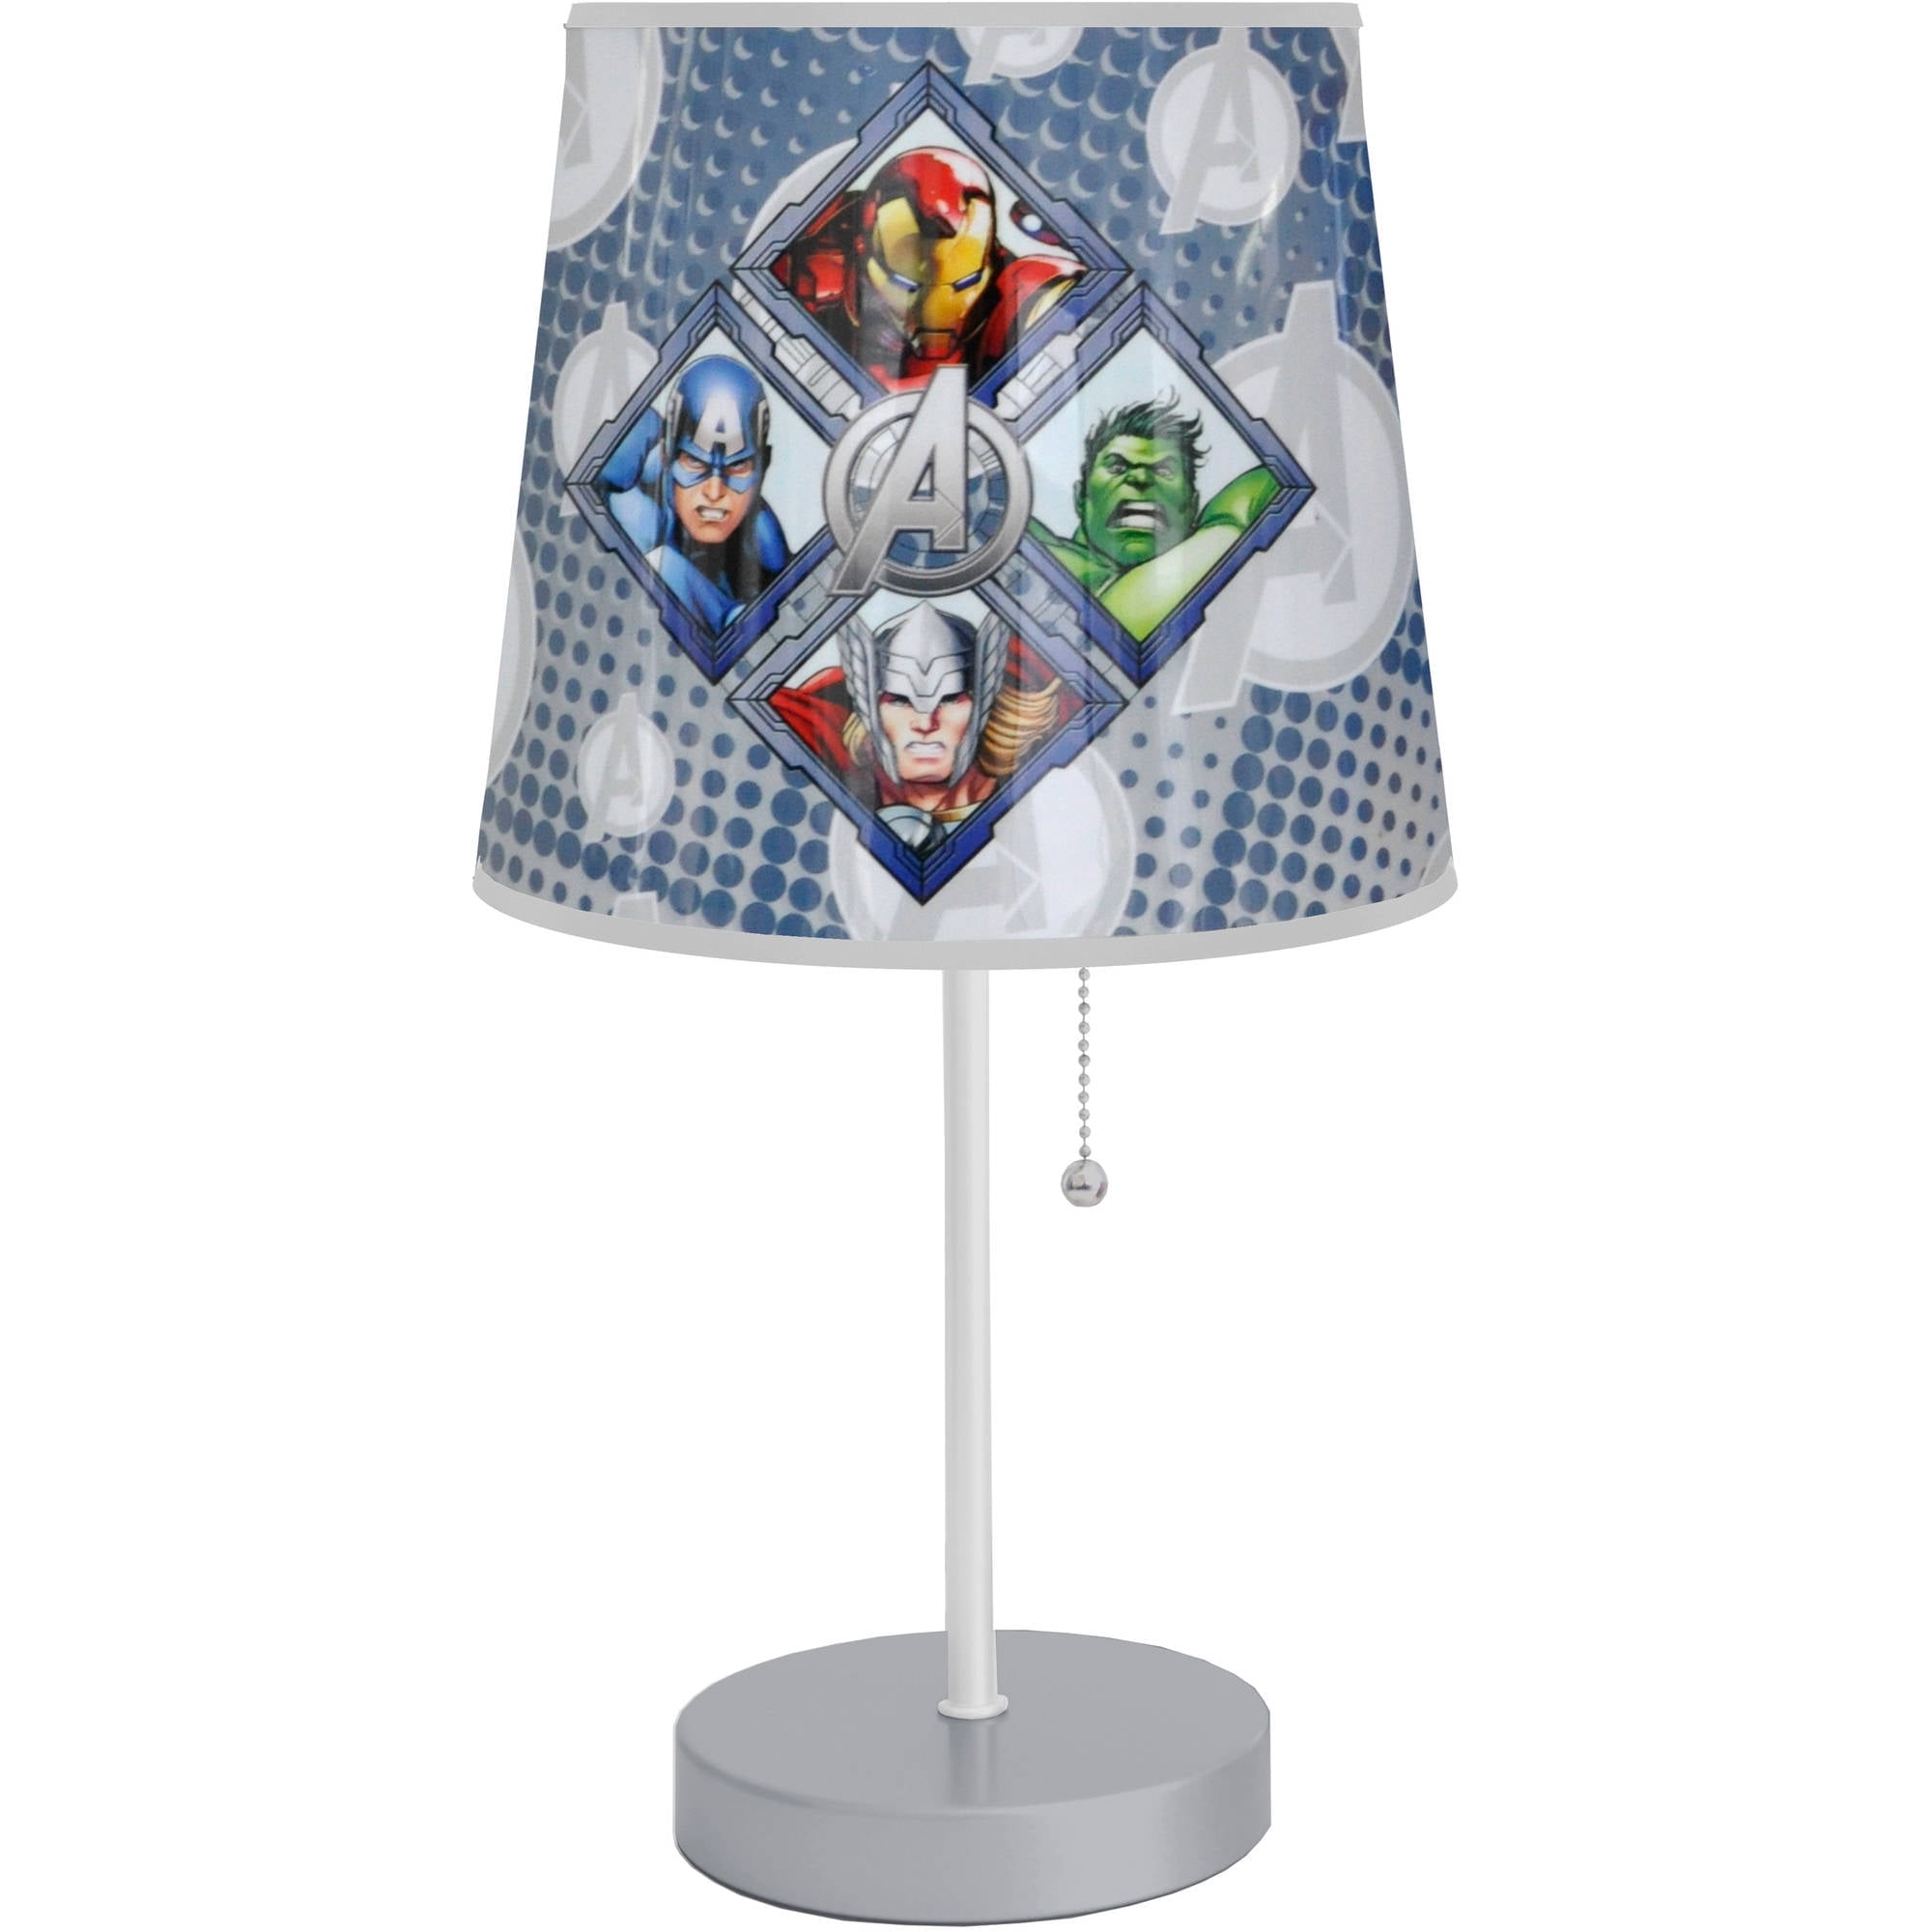 All Other Brands WN240172 Marvel Avengers Table Lamp - Silver